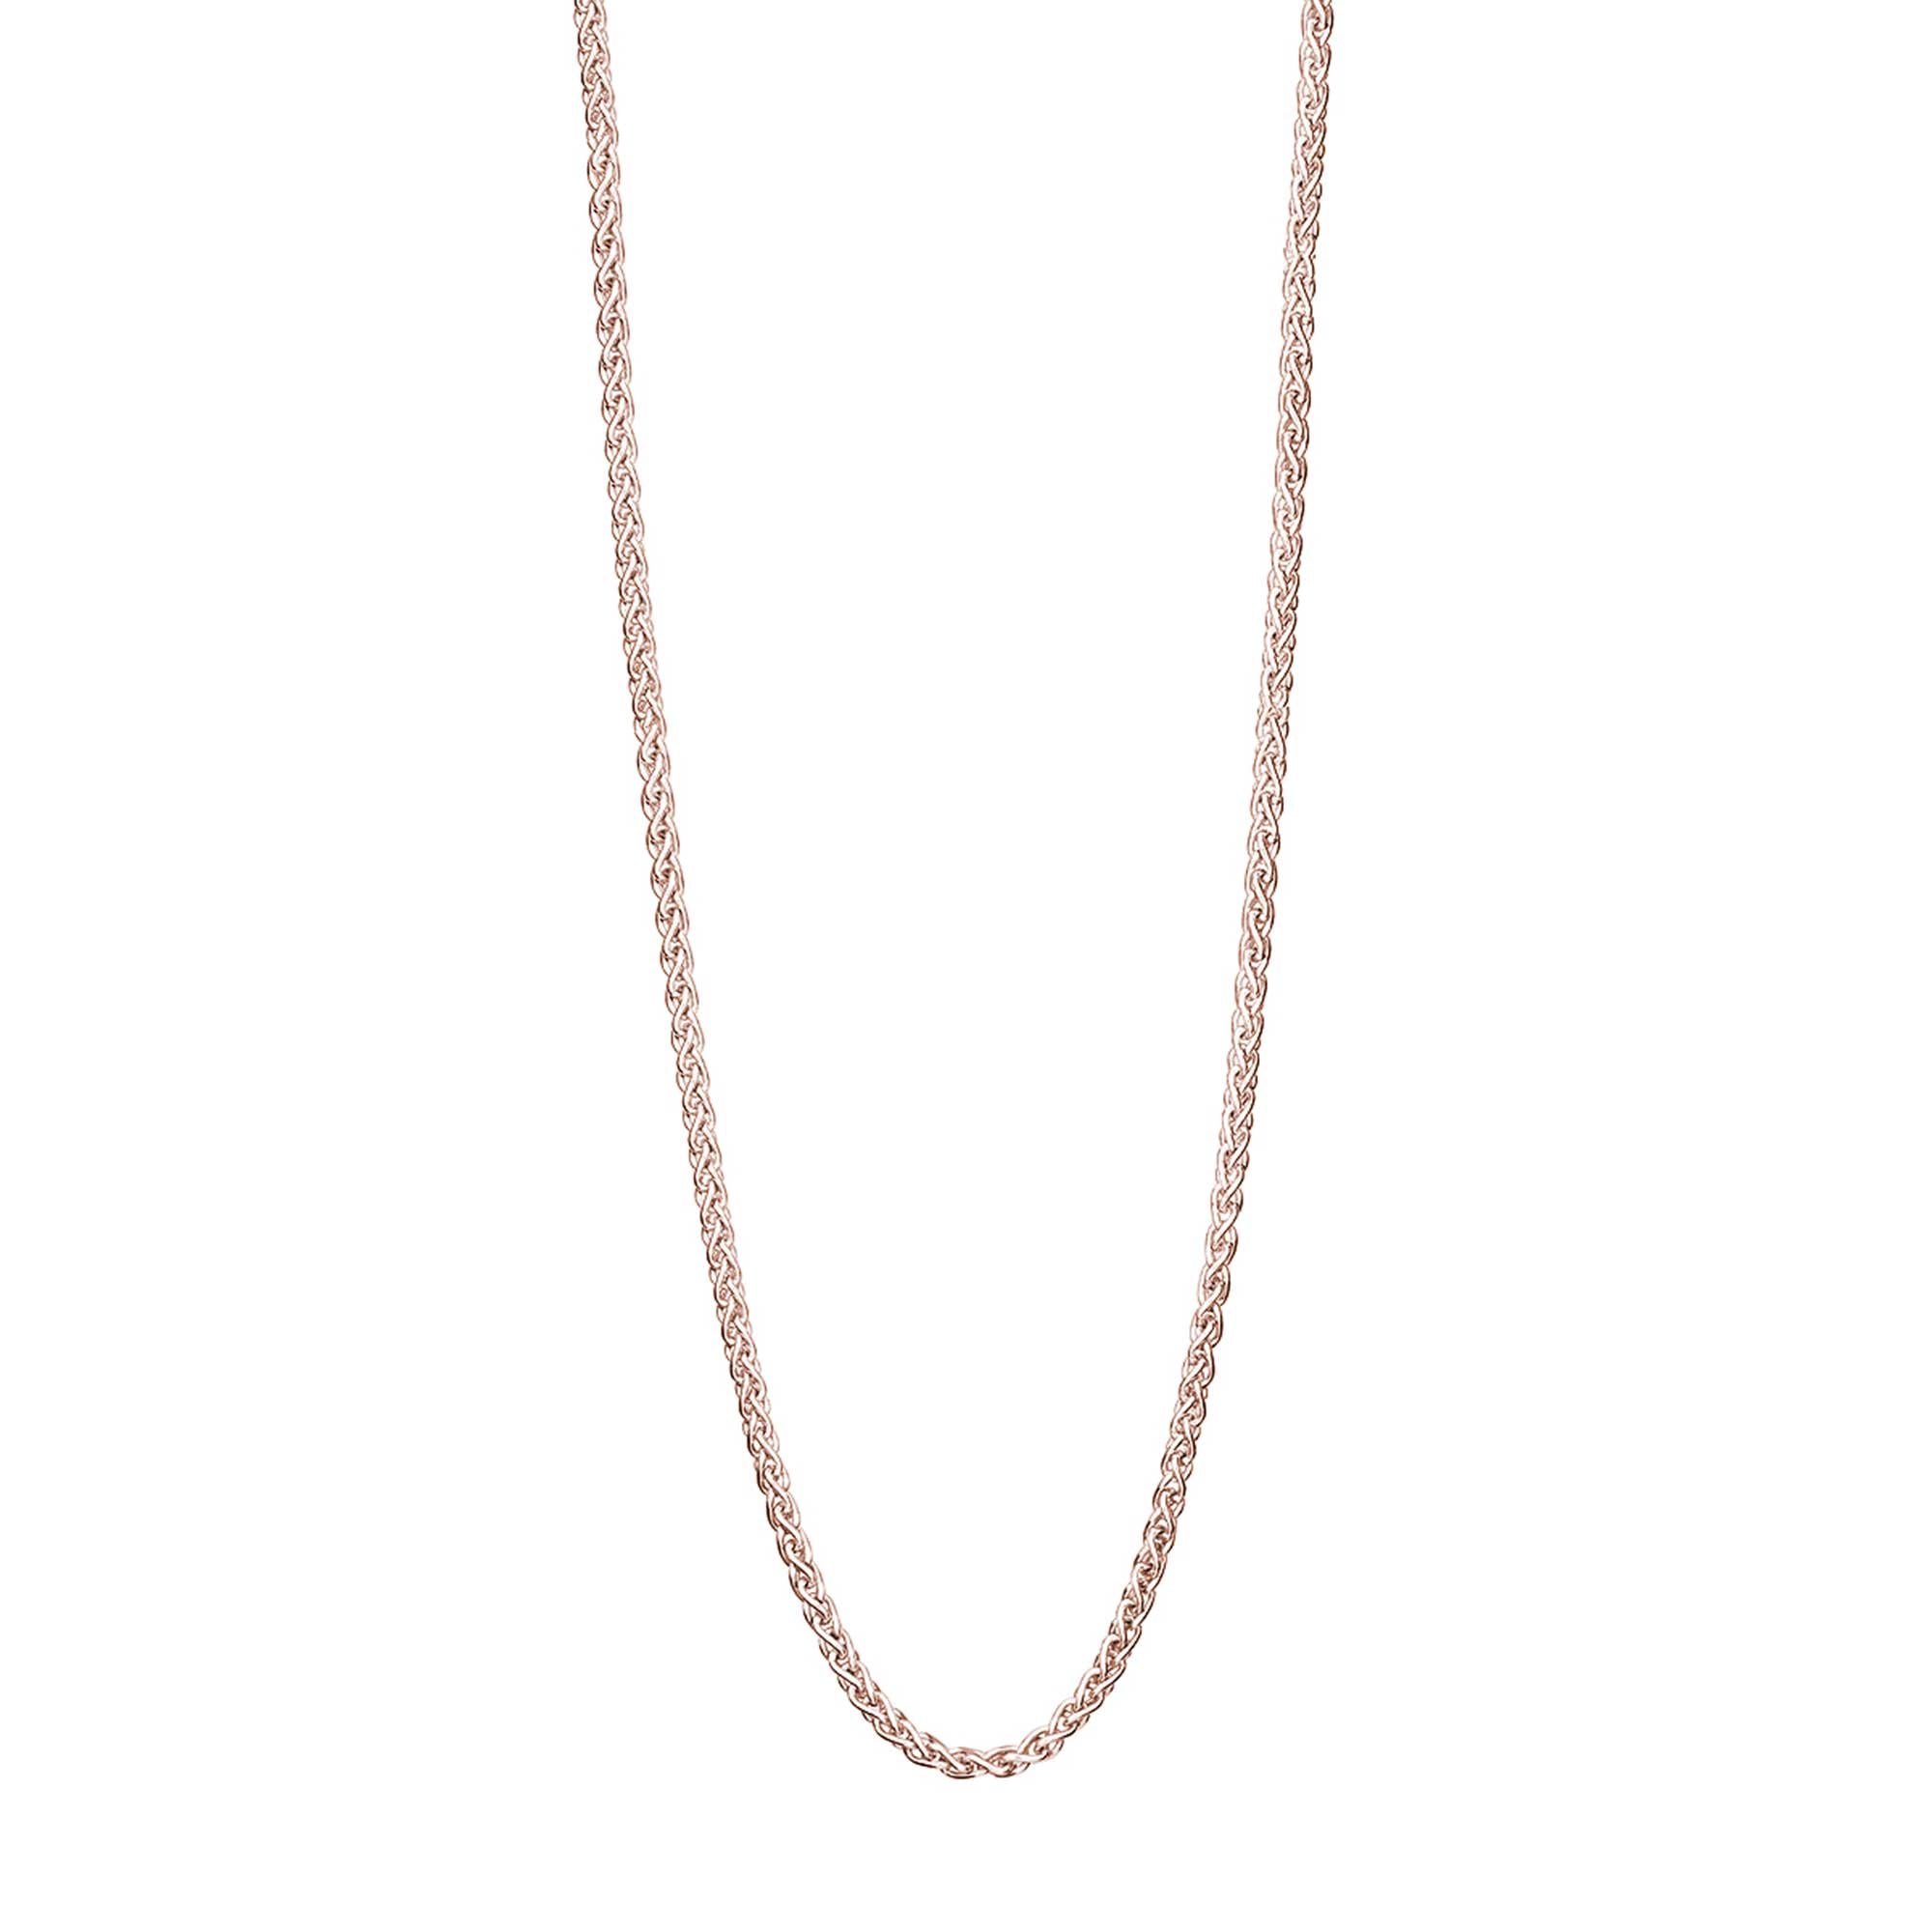 Solid rose gold spiga rope style chain necklace scarlett jewellery